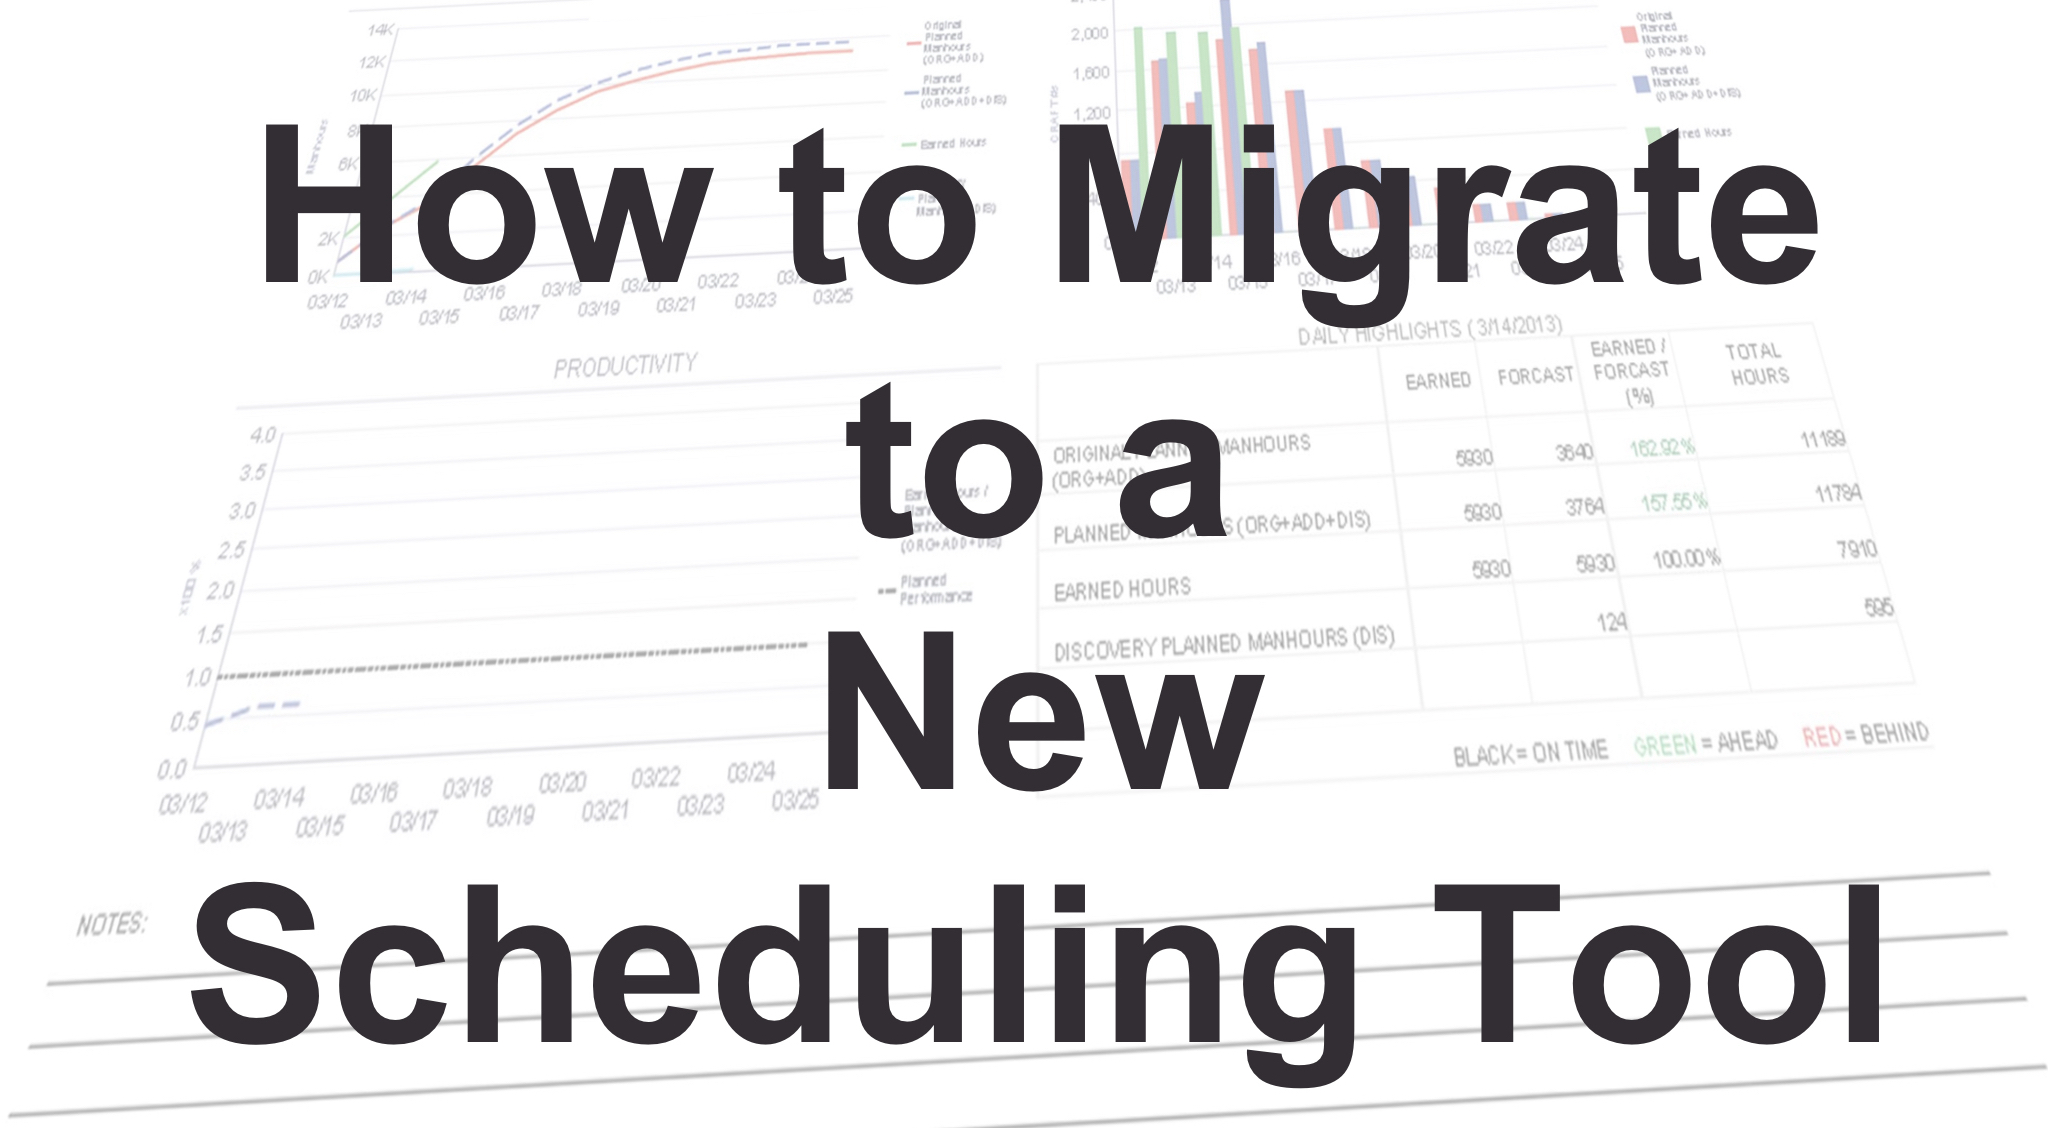 Migrate to a New Scheduling Tool